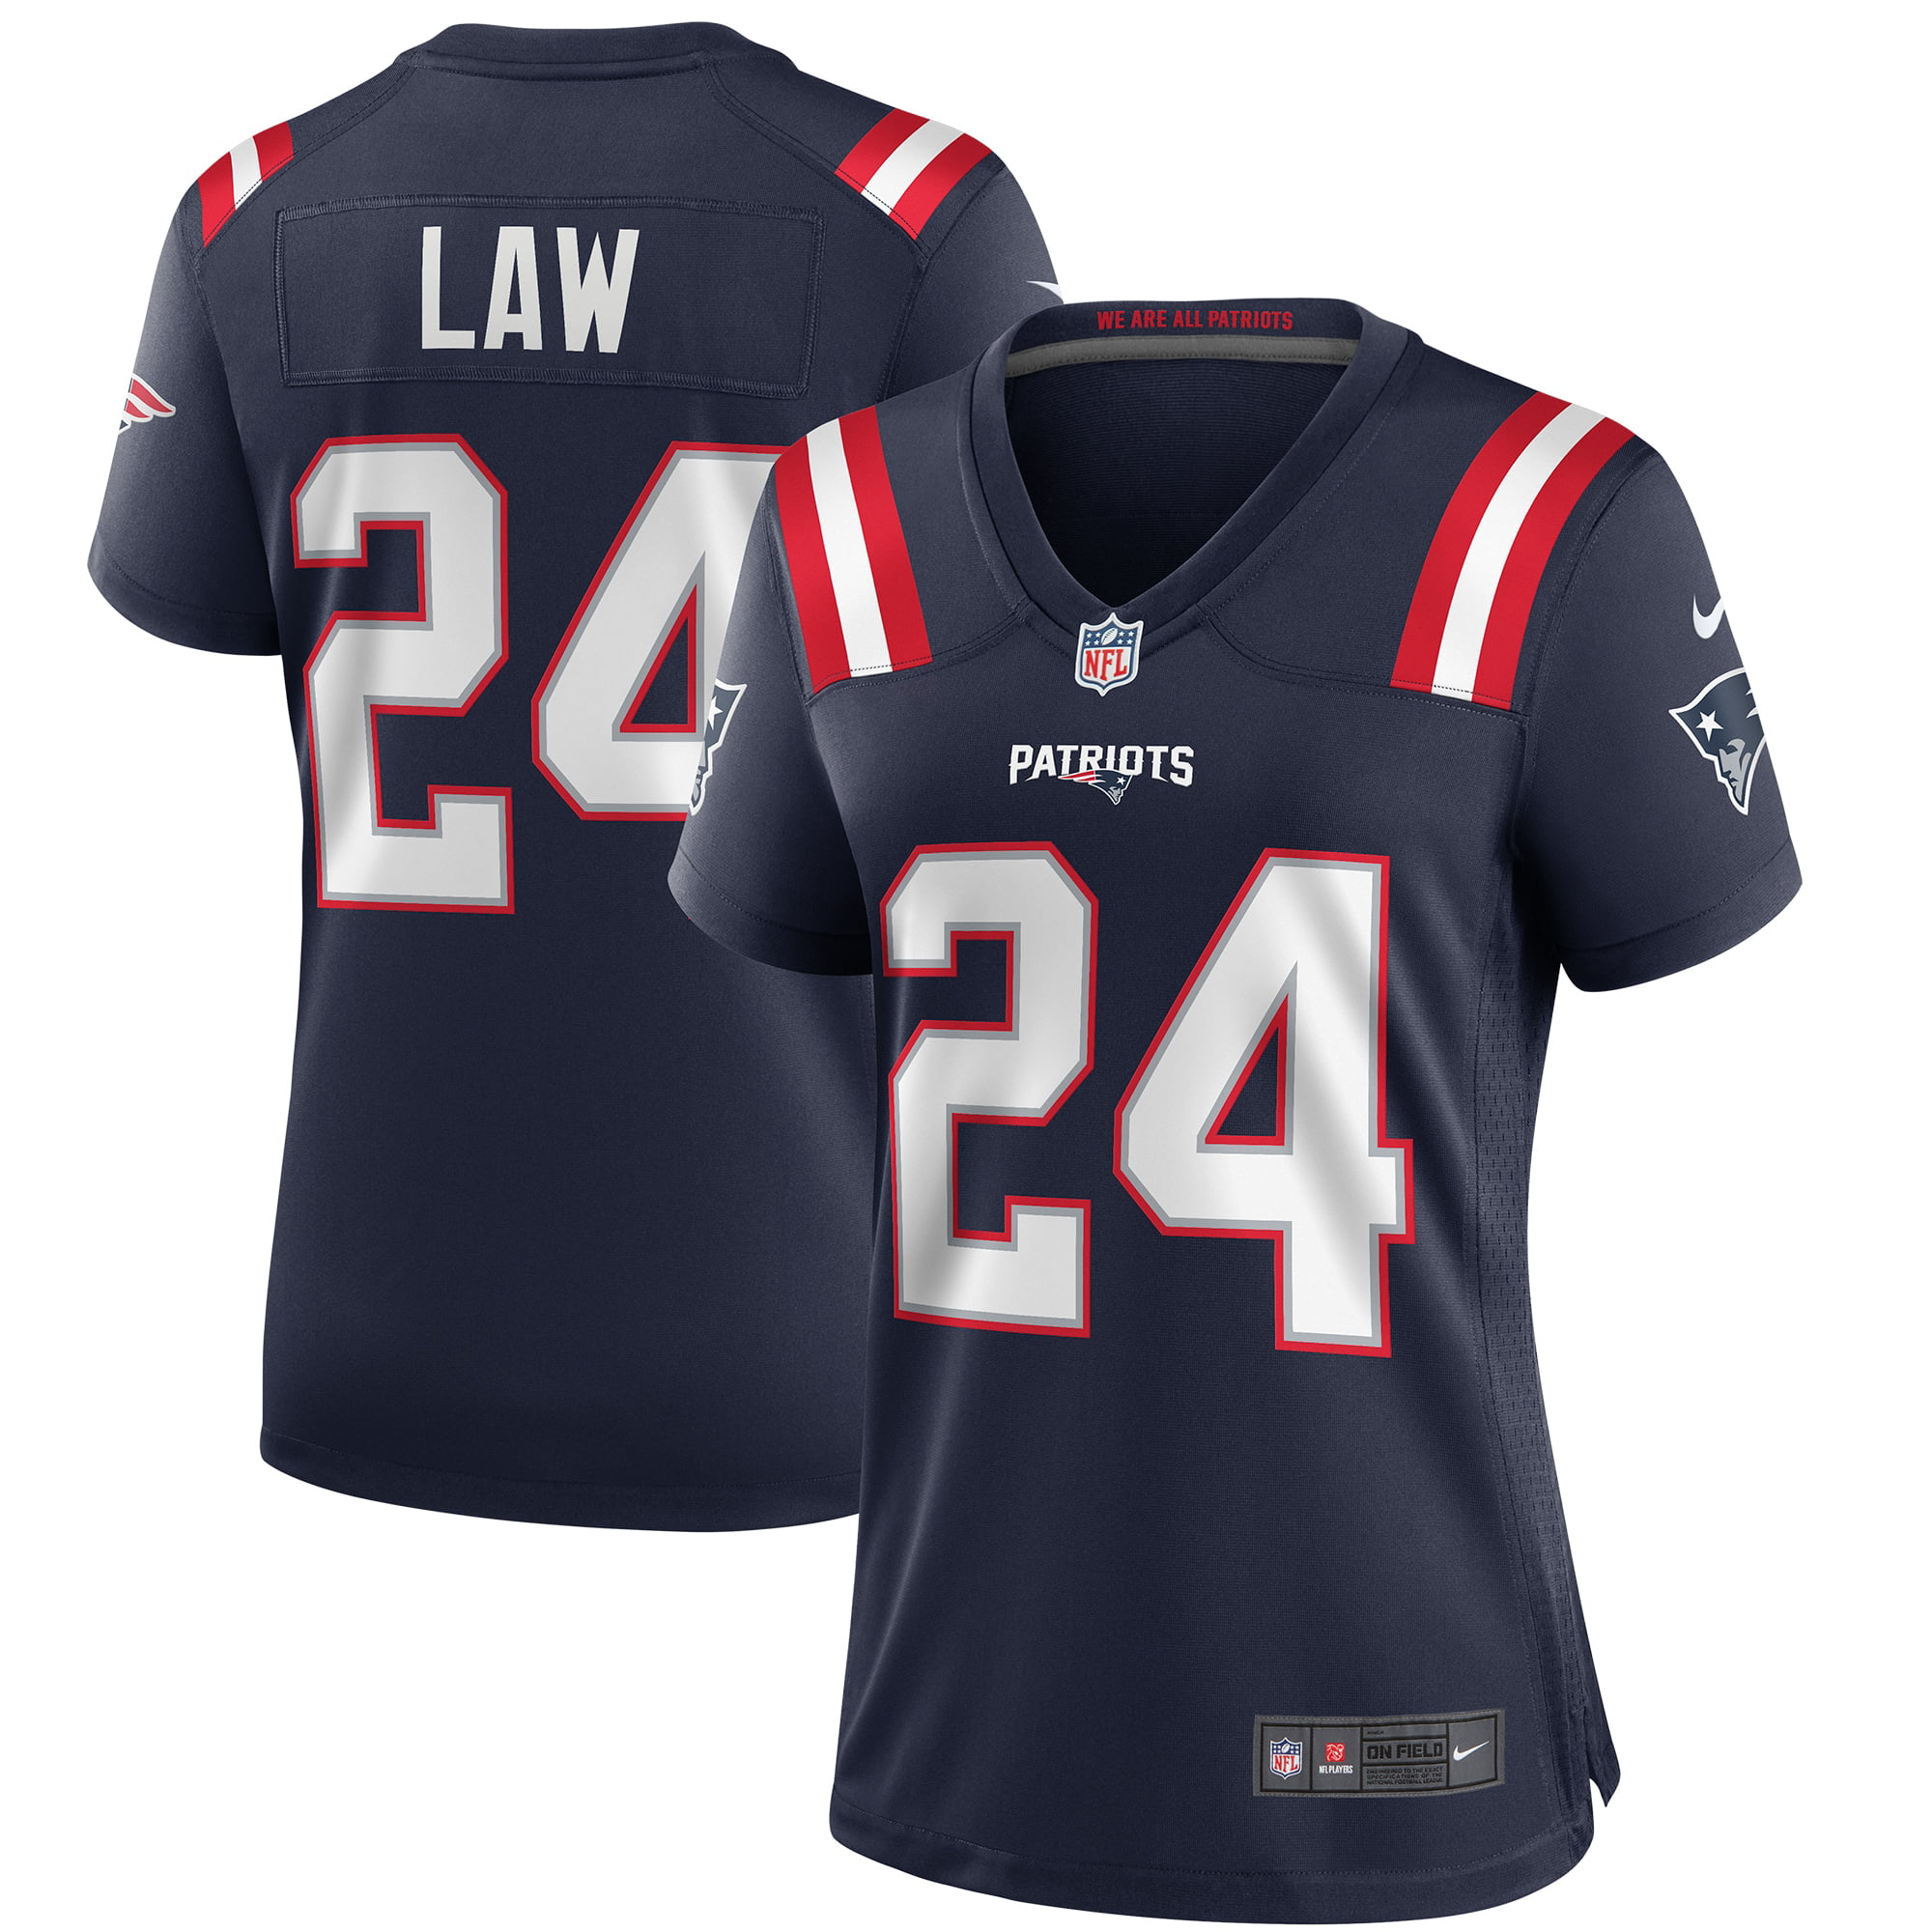 ty law patriots jersey